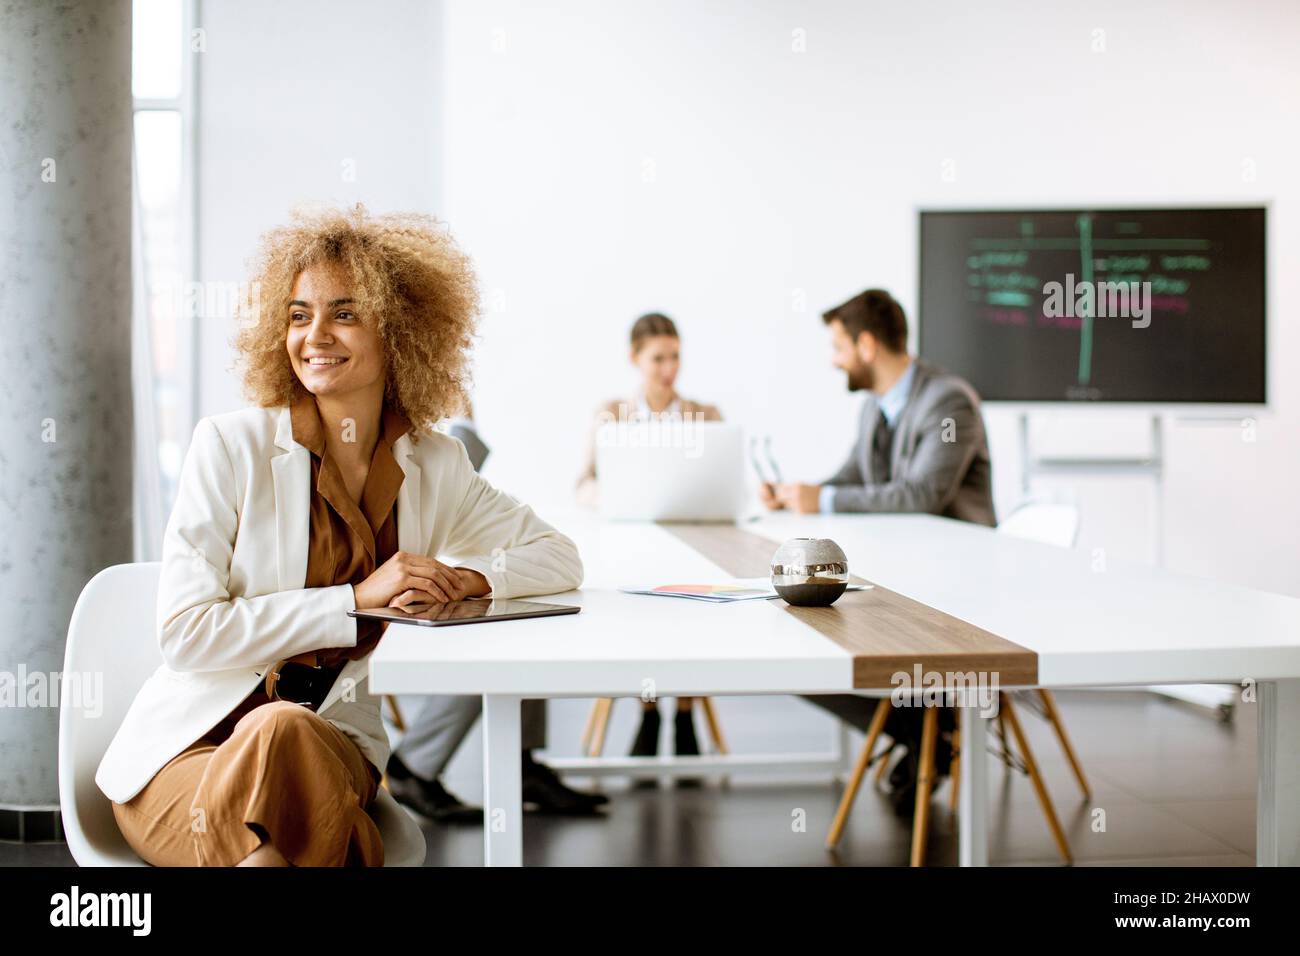 Young curly hair businesswoman using digital tablet in the office with young people works behind her Stock Photo